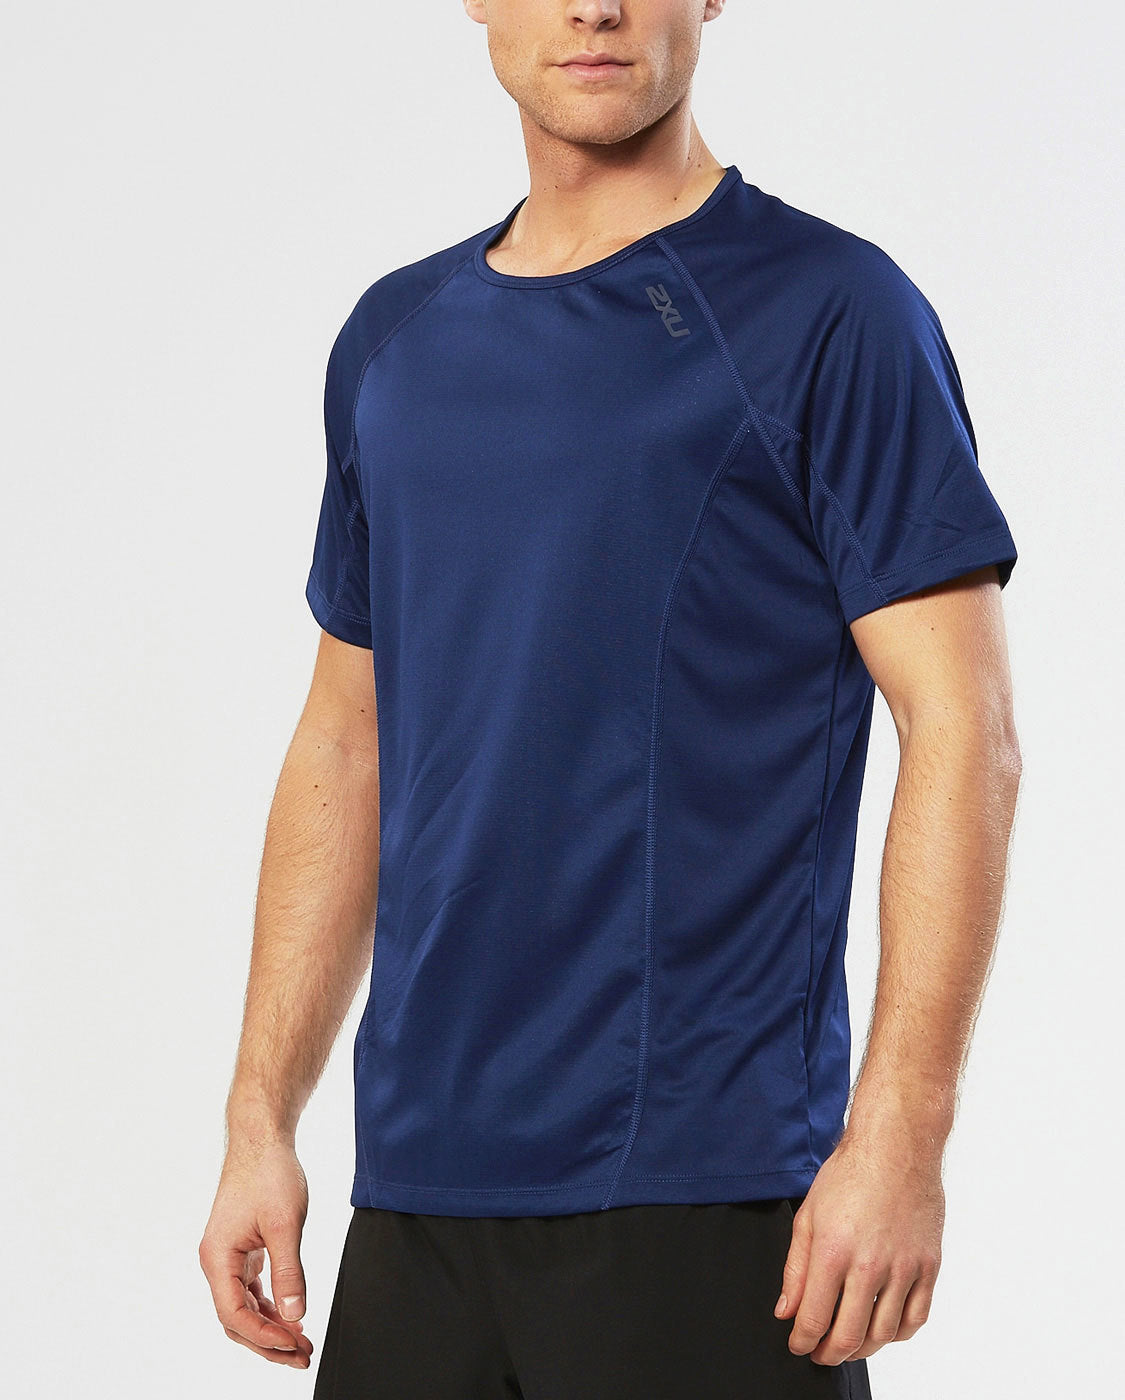 2XU Ignition S/S Top